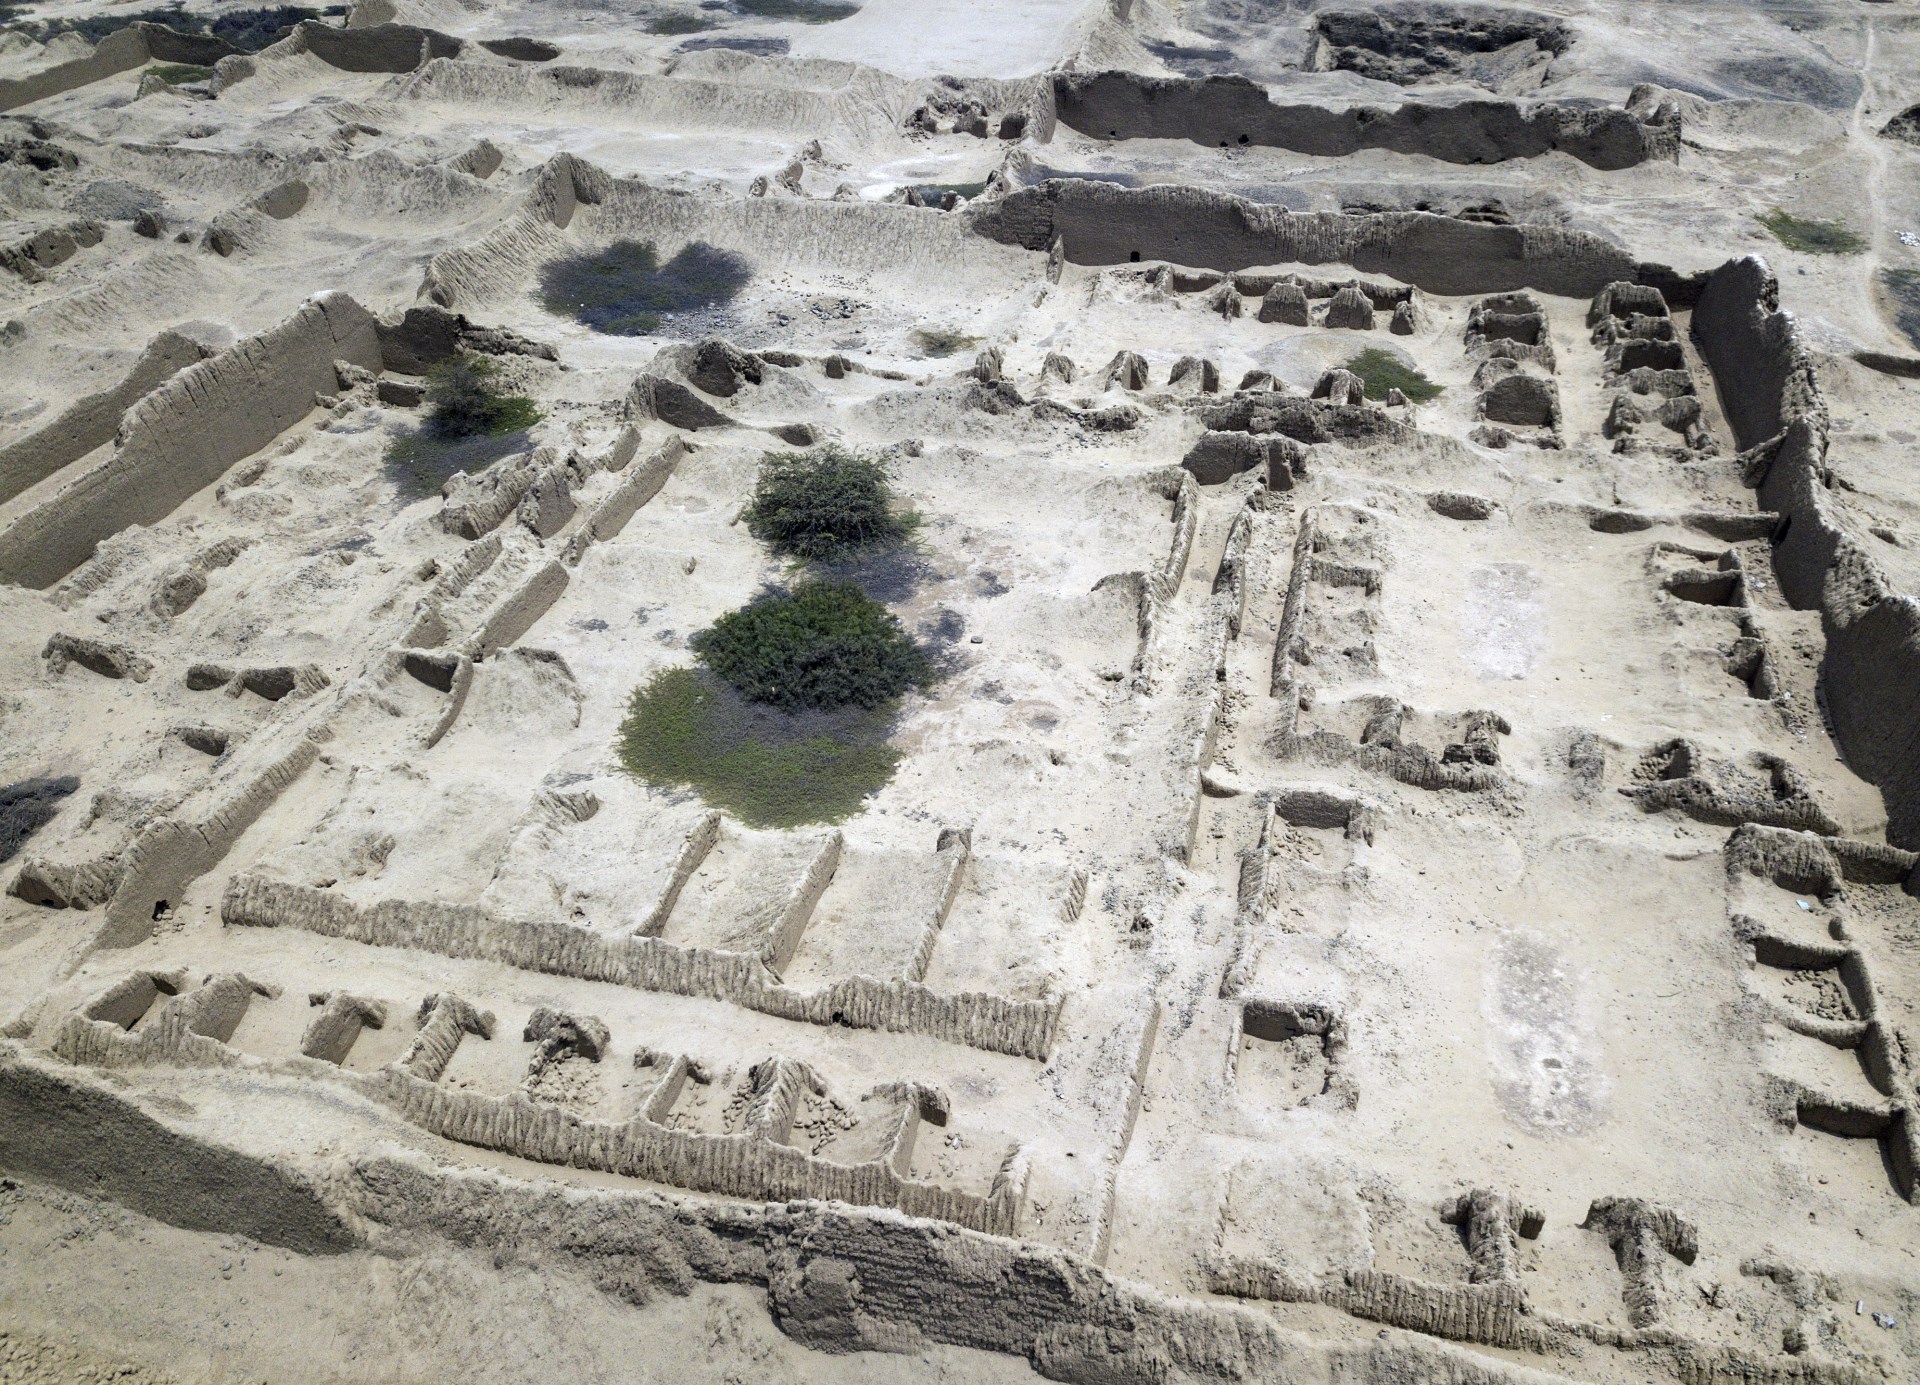 Technology: A 4,000-year-old ancient structure was found in China